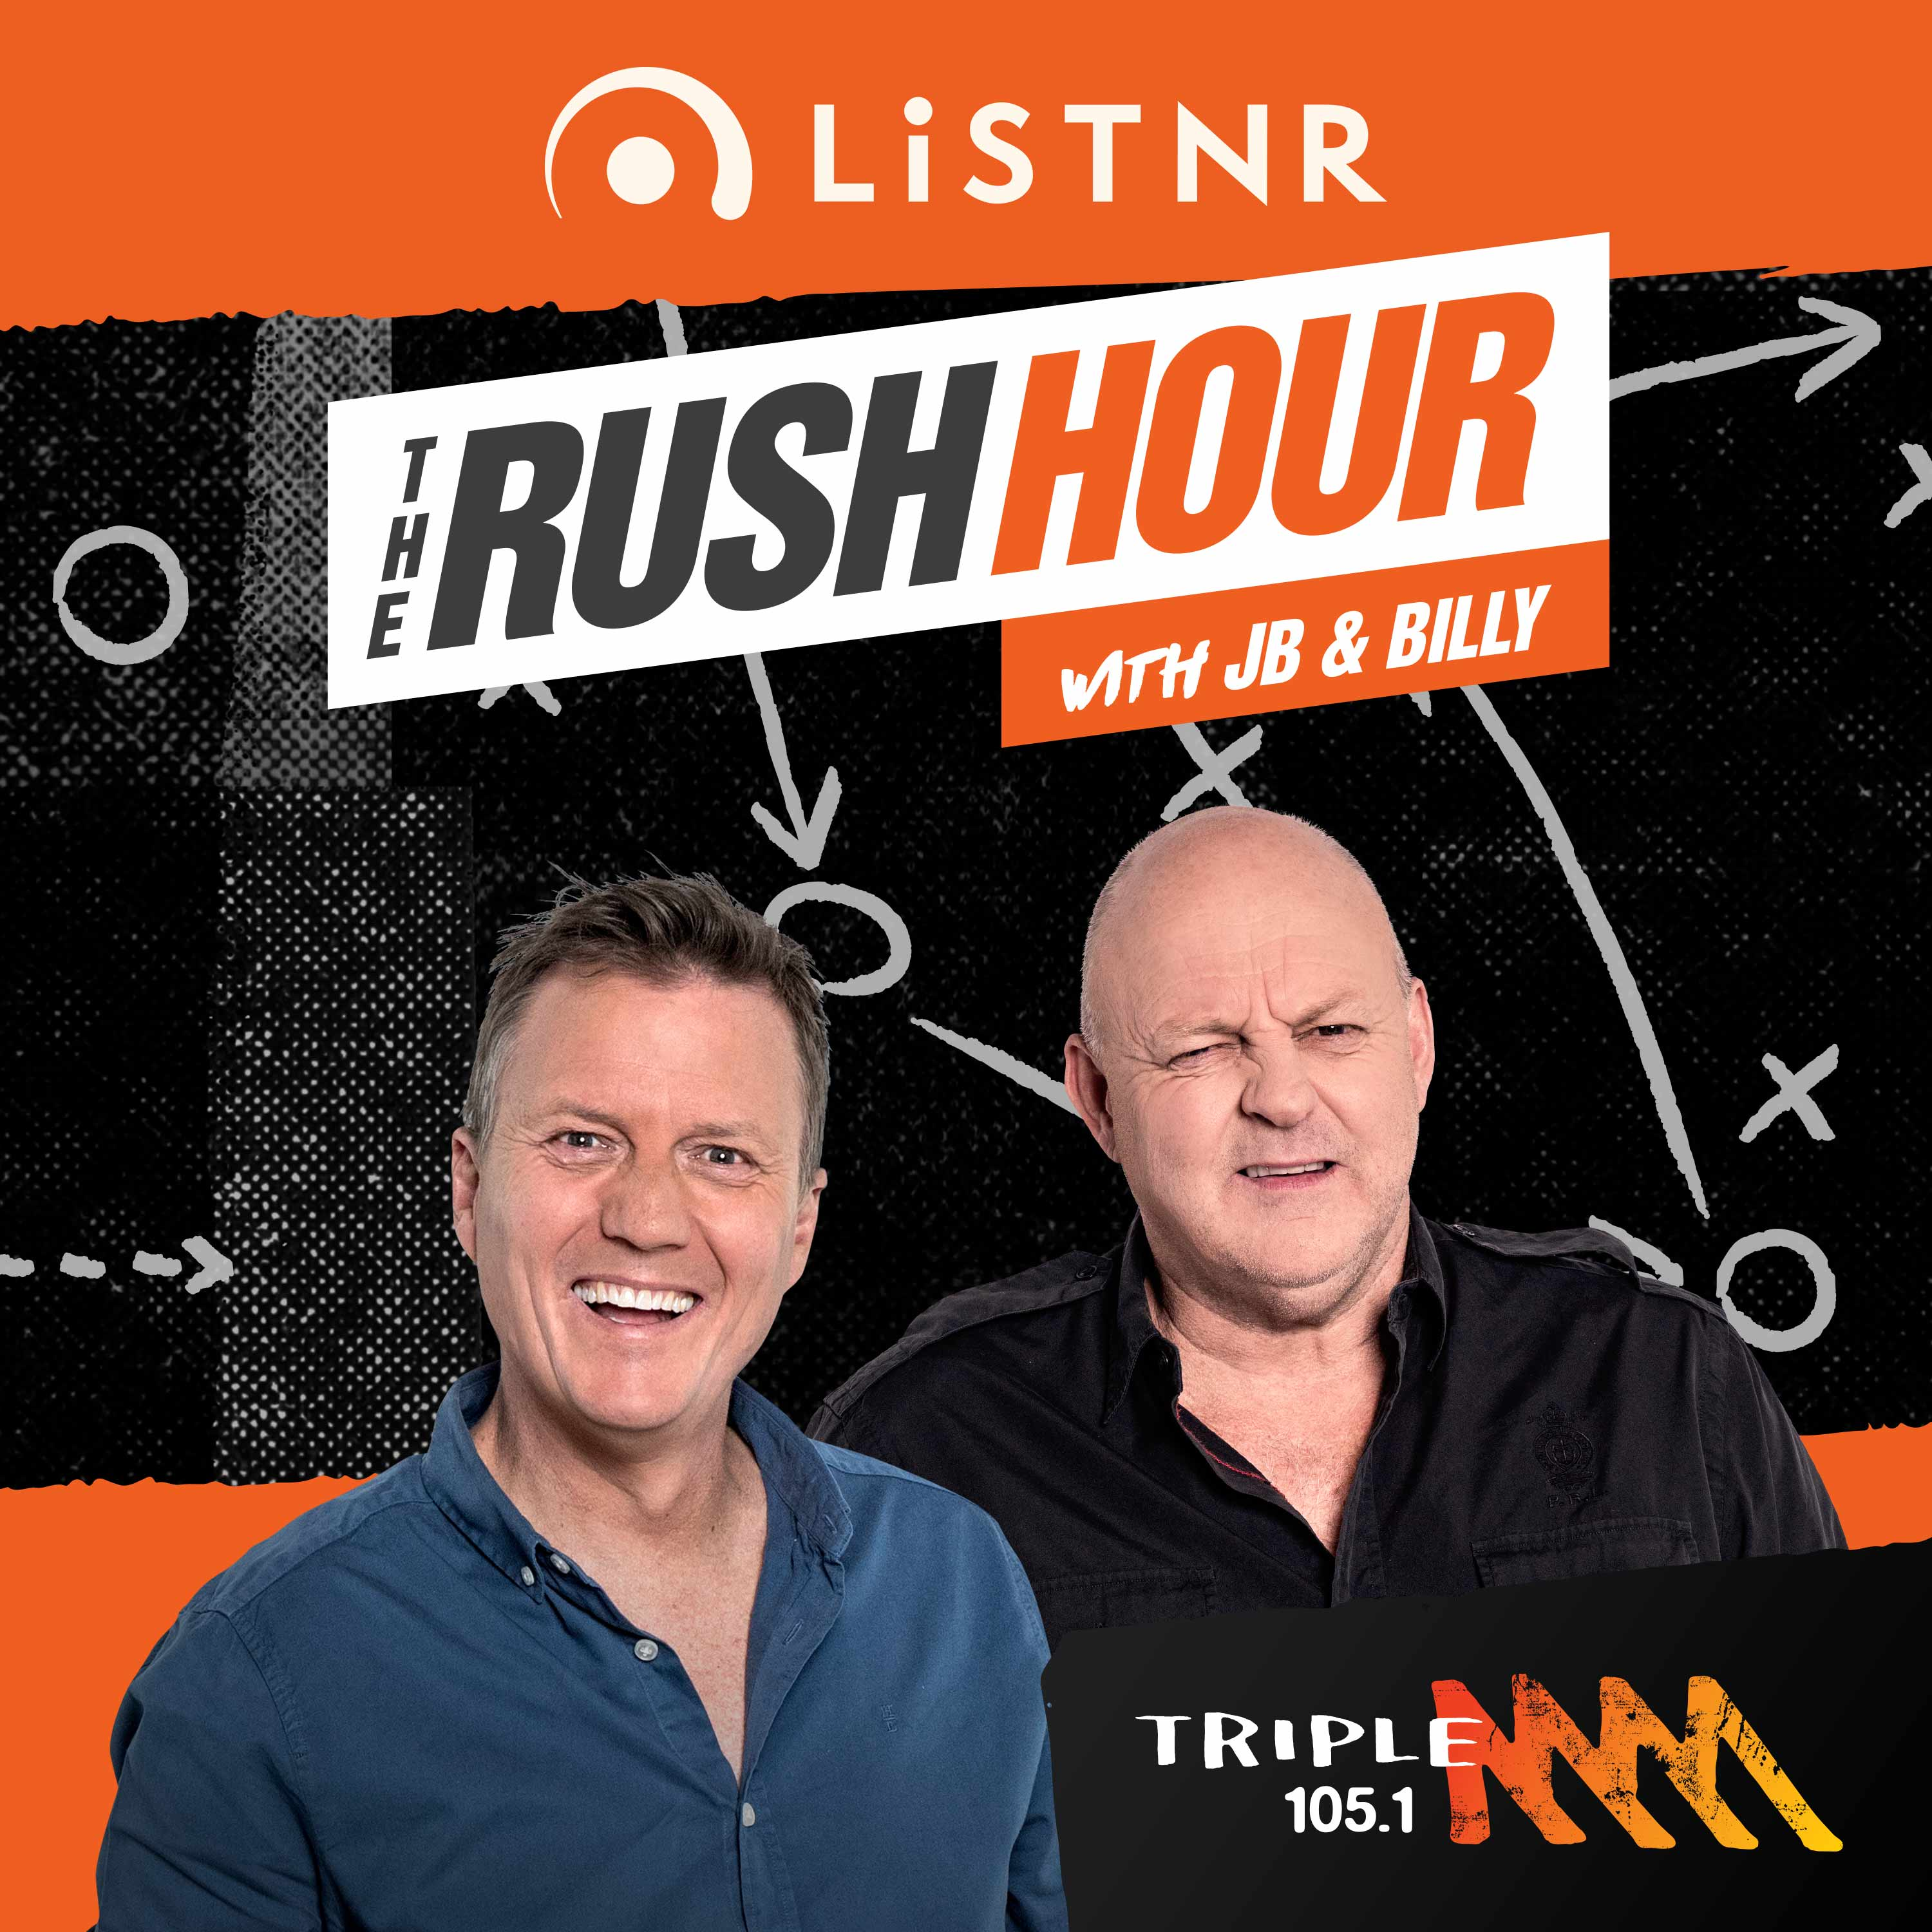 Daniel Rich, Longheld Grudges, JB's Leadership Essentials - The Rush Hour podcast - Tuesday 24th May 2022